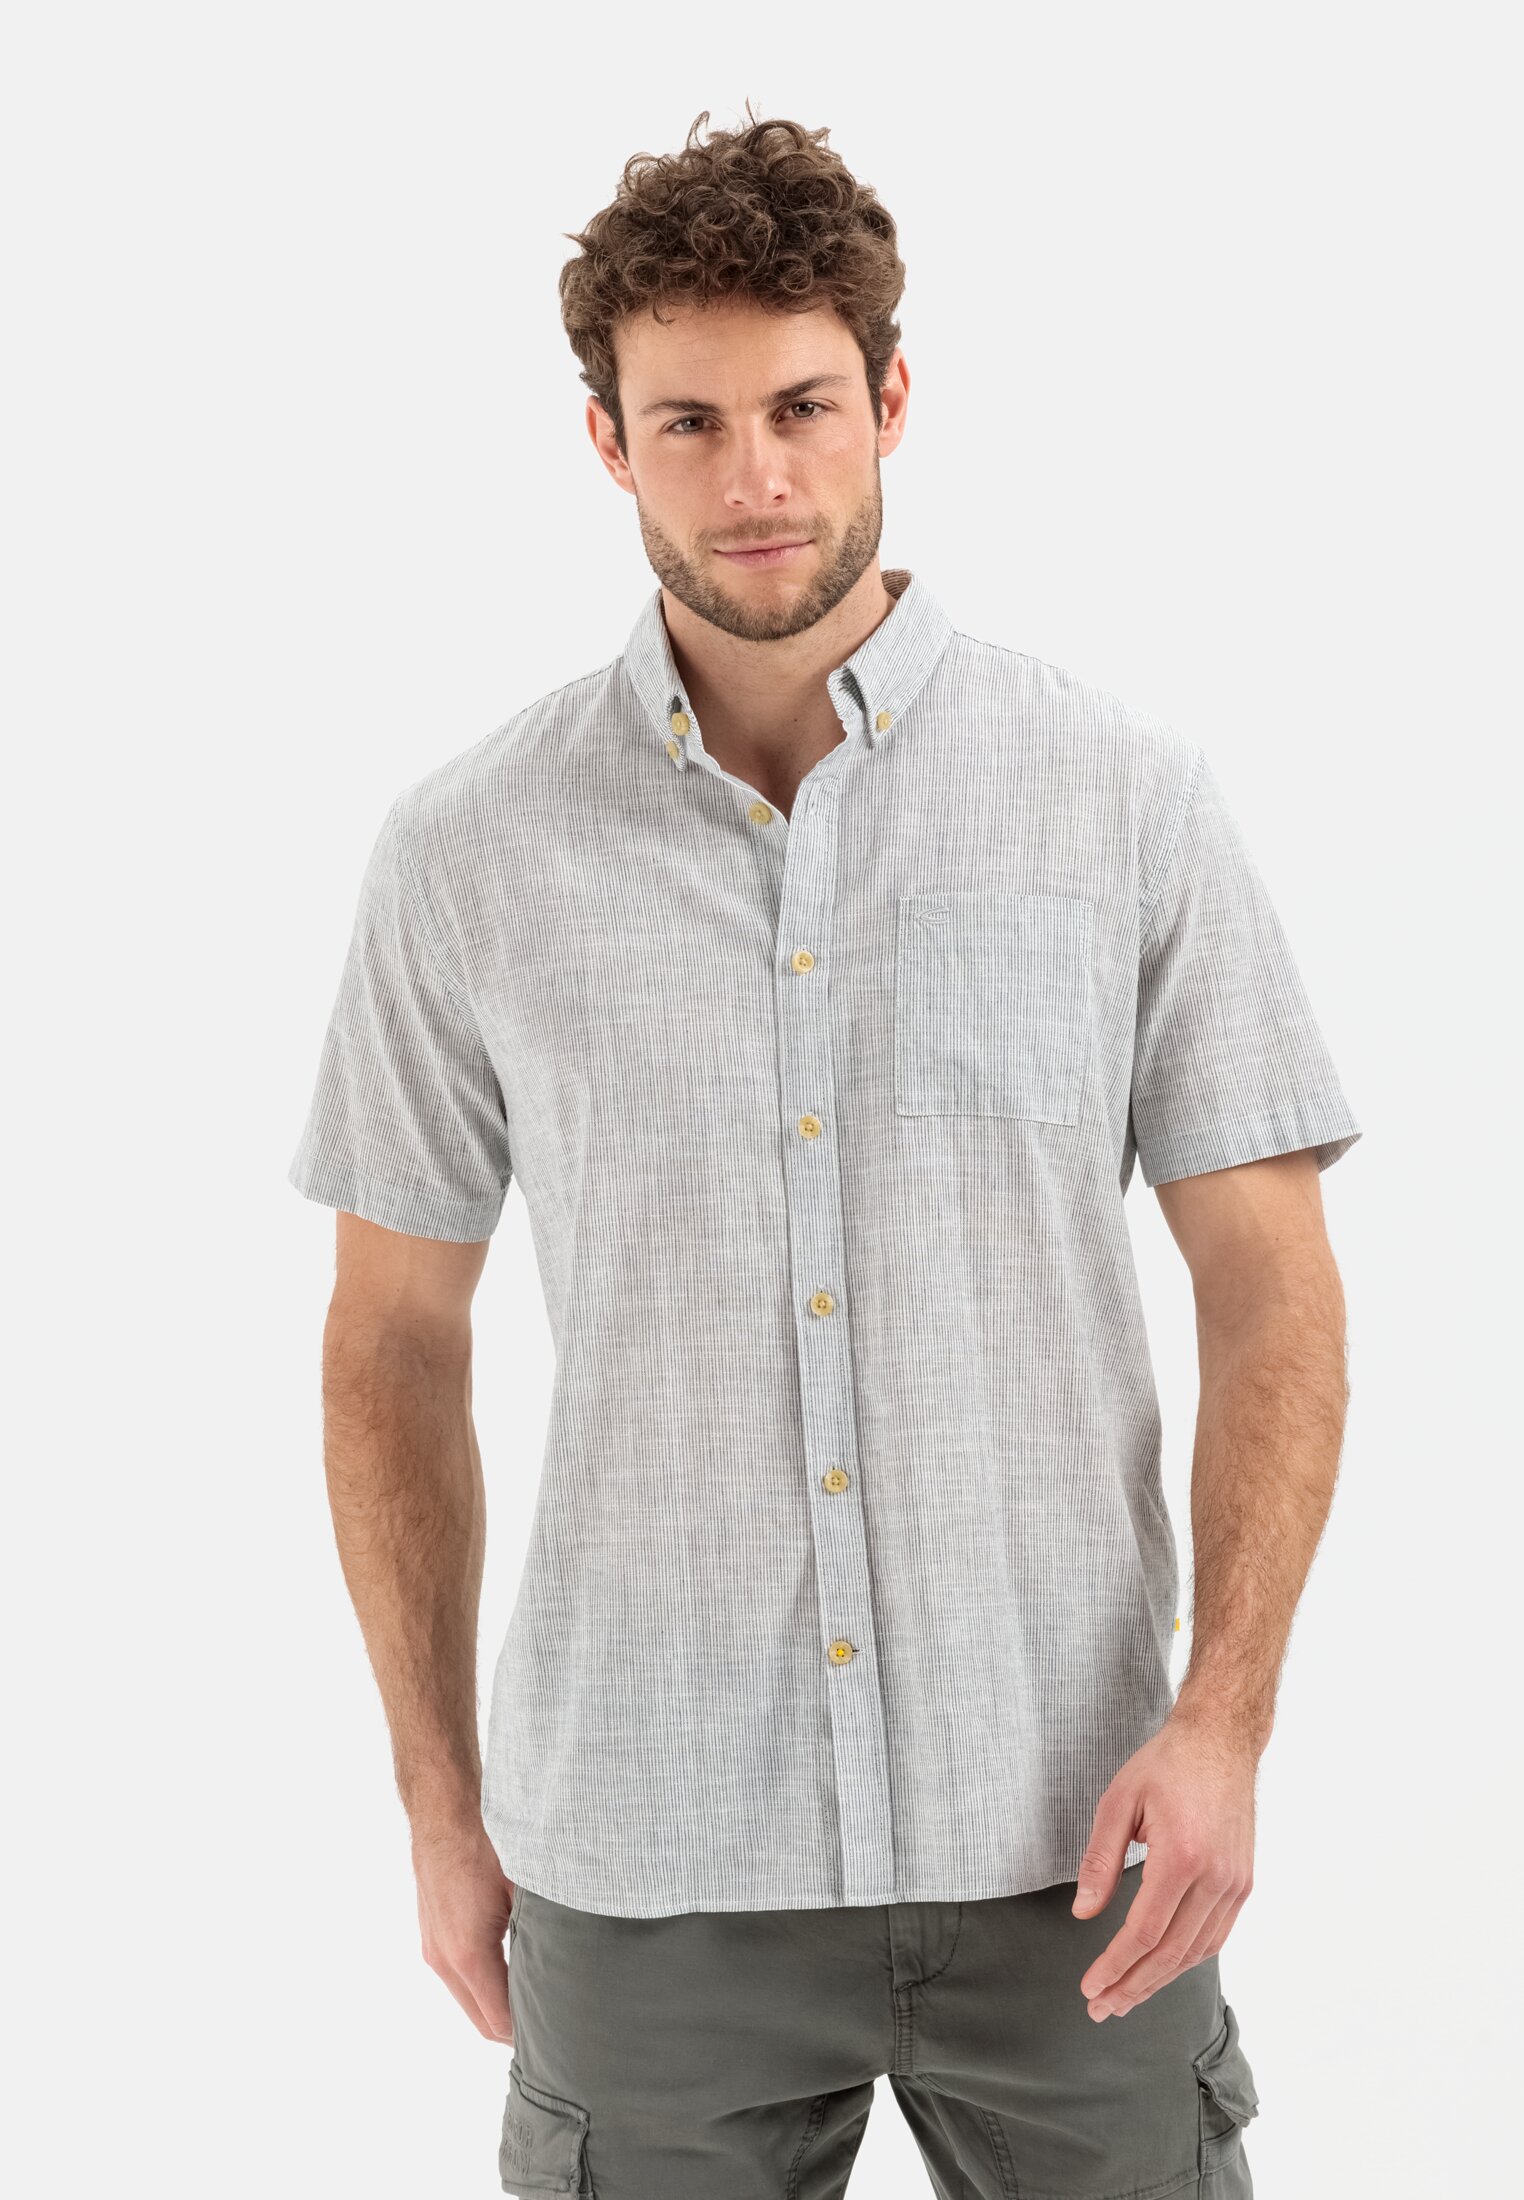 Camel Active Short sleeve shirt in a striped pattern